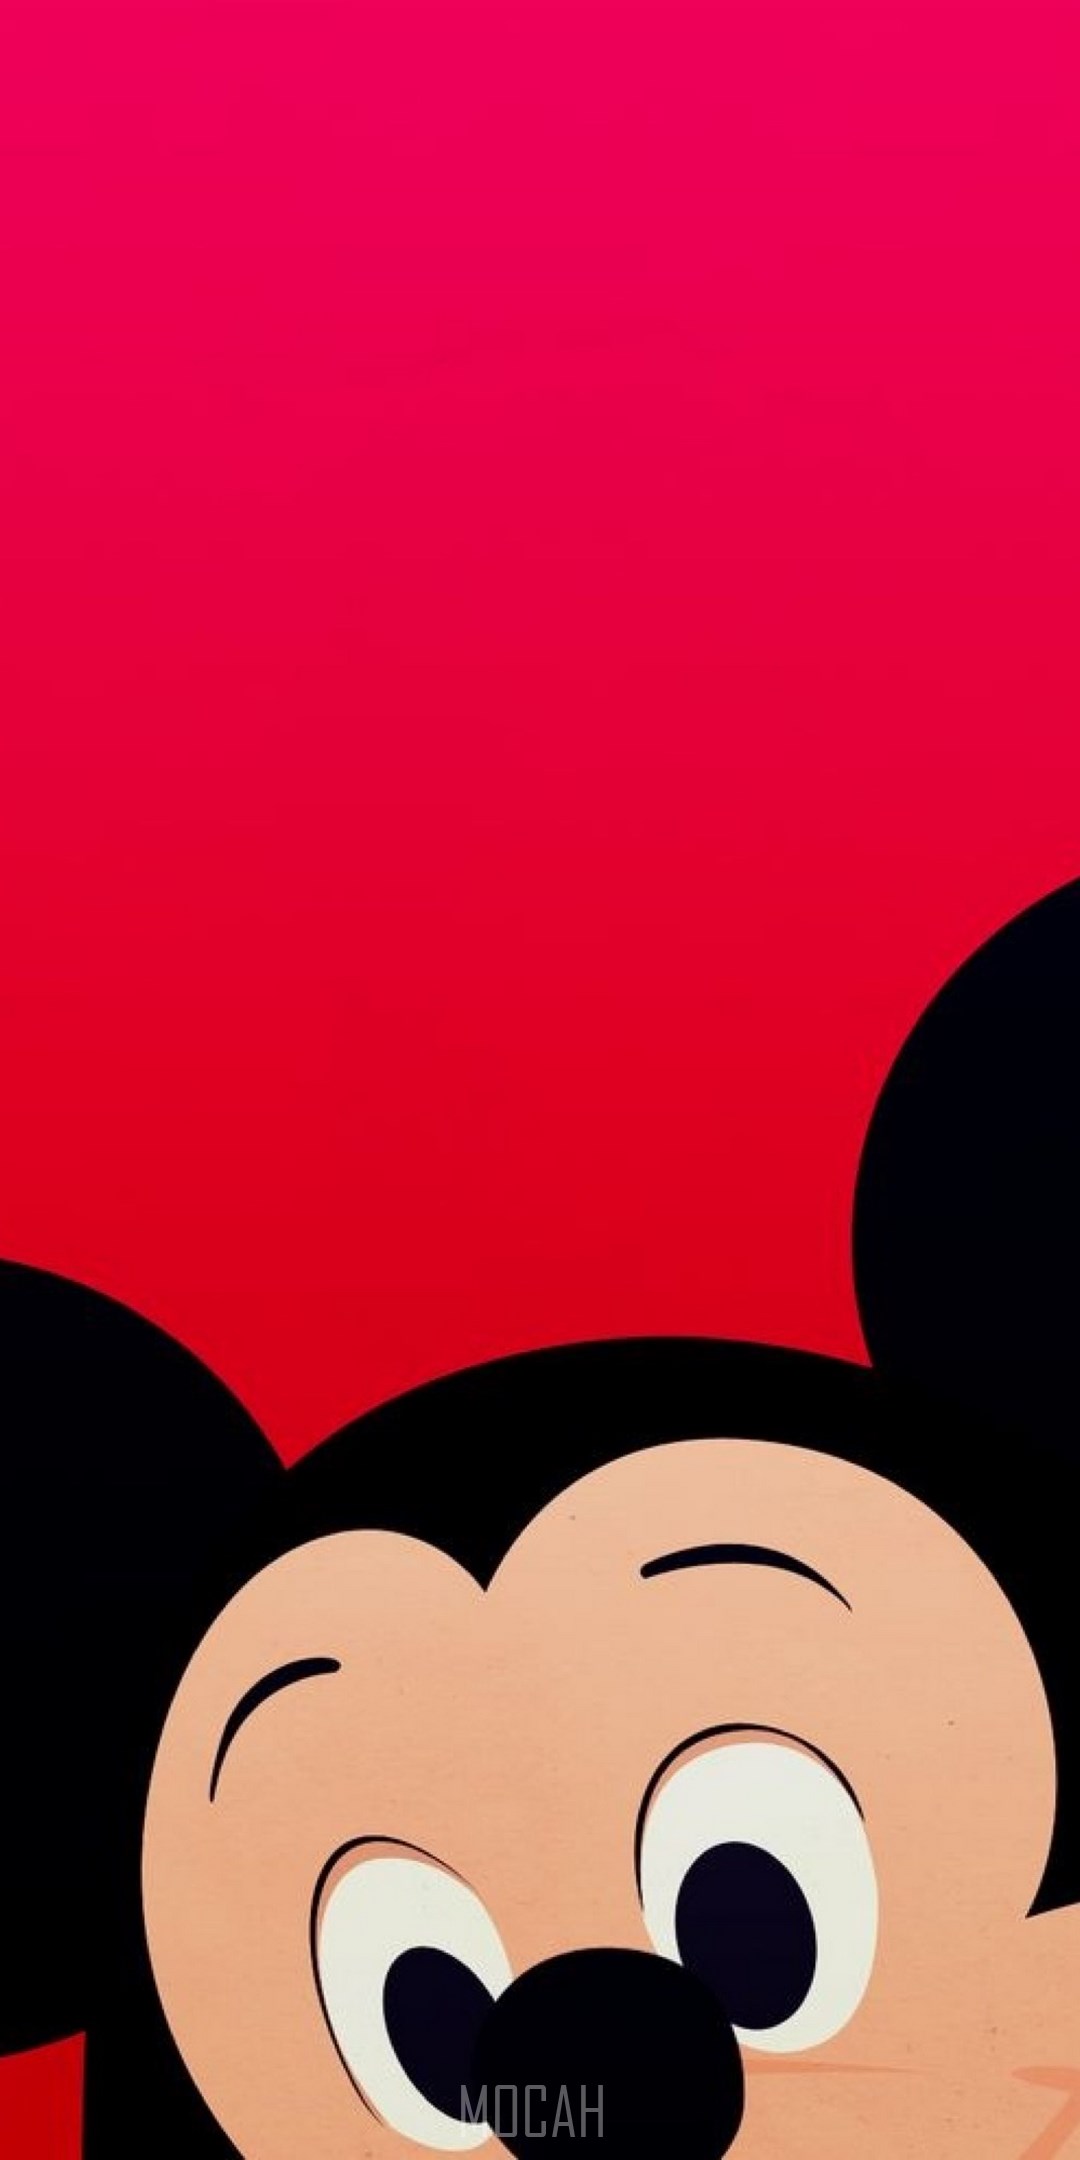 Mickey Mouse, Minnie Mouse, The Walt Disney Company, Cartoon, Red, OnePlus 8 wallpaper HD download, 1080x2400 Gallery HD Wallpaper